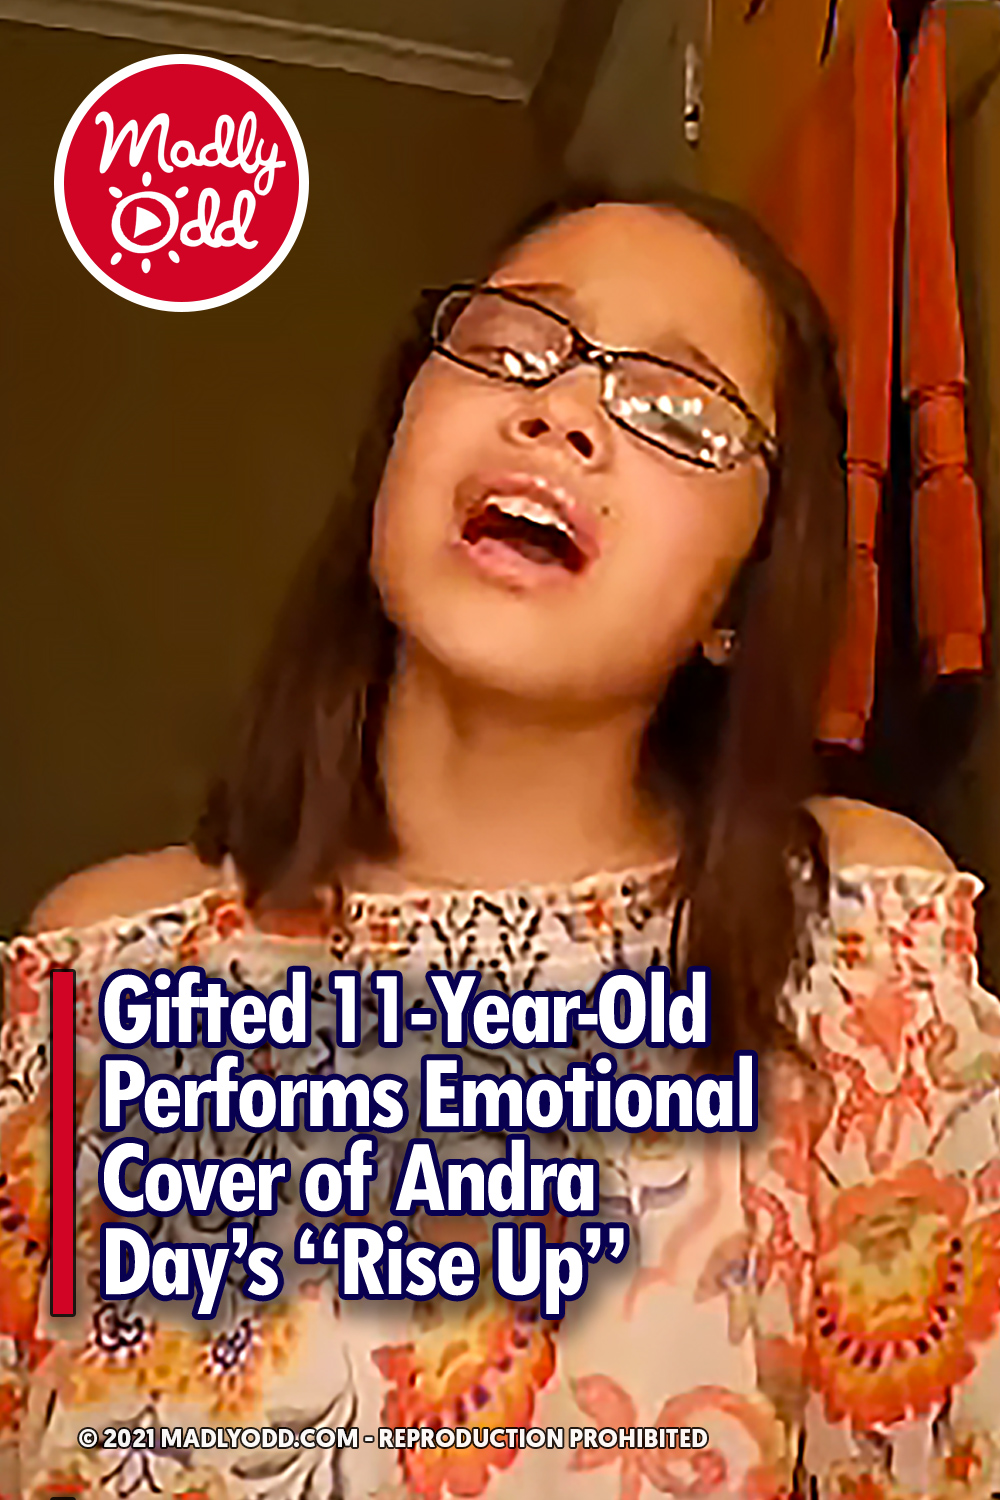 Gifted 11-Year-Old Performs Emotional Cover of Andra Day’s “Rise Up”